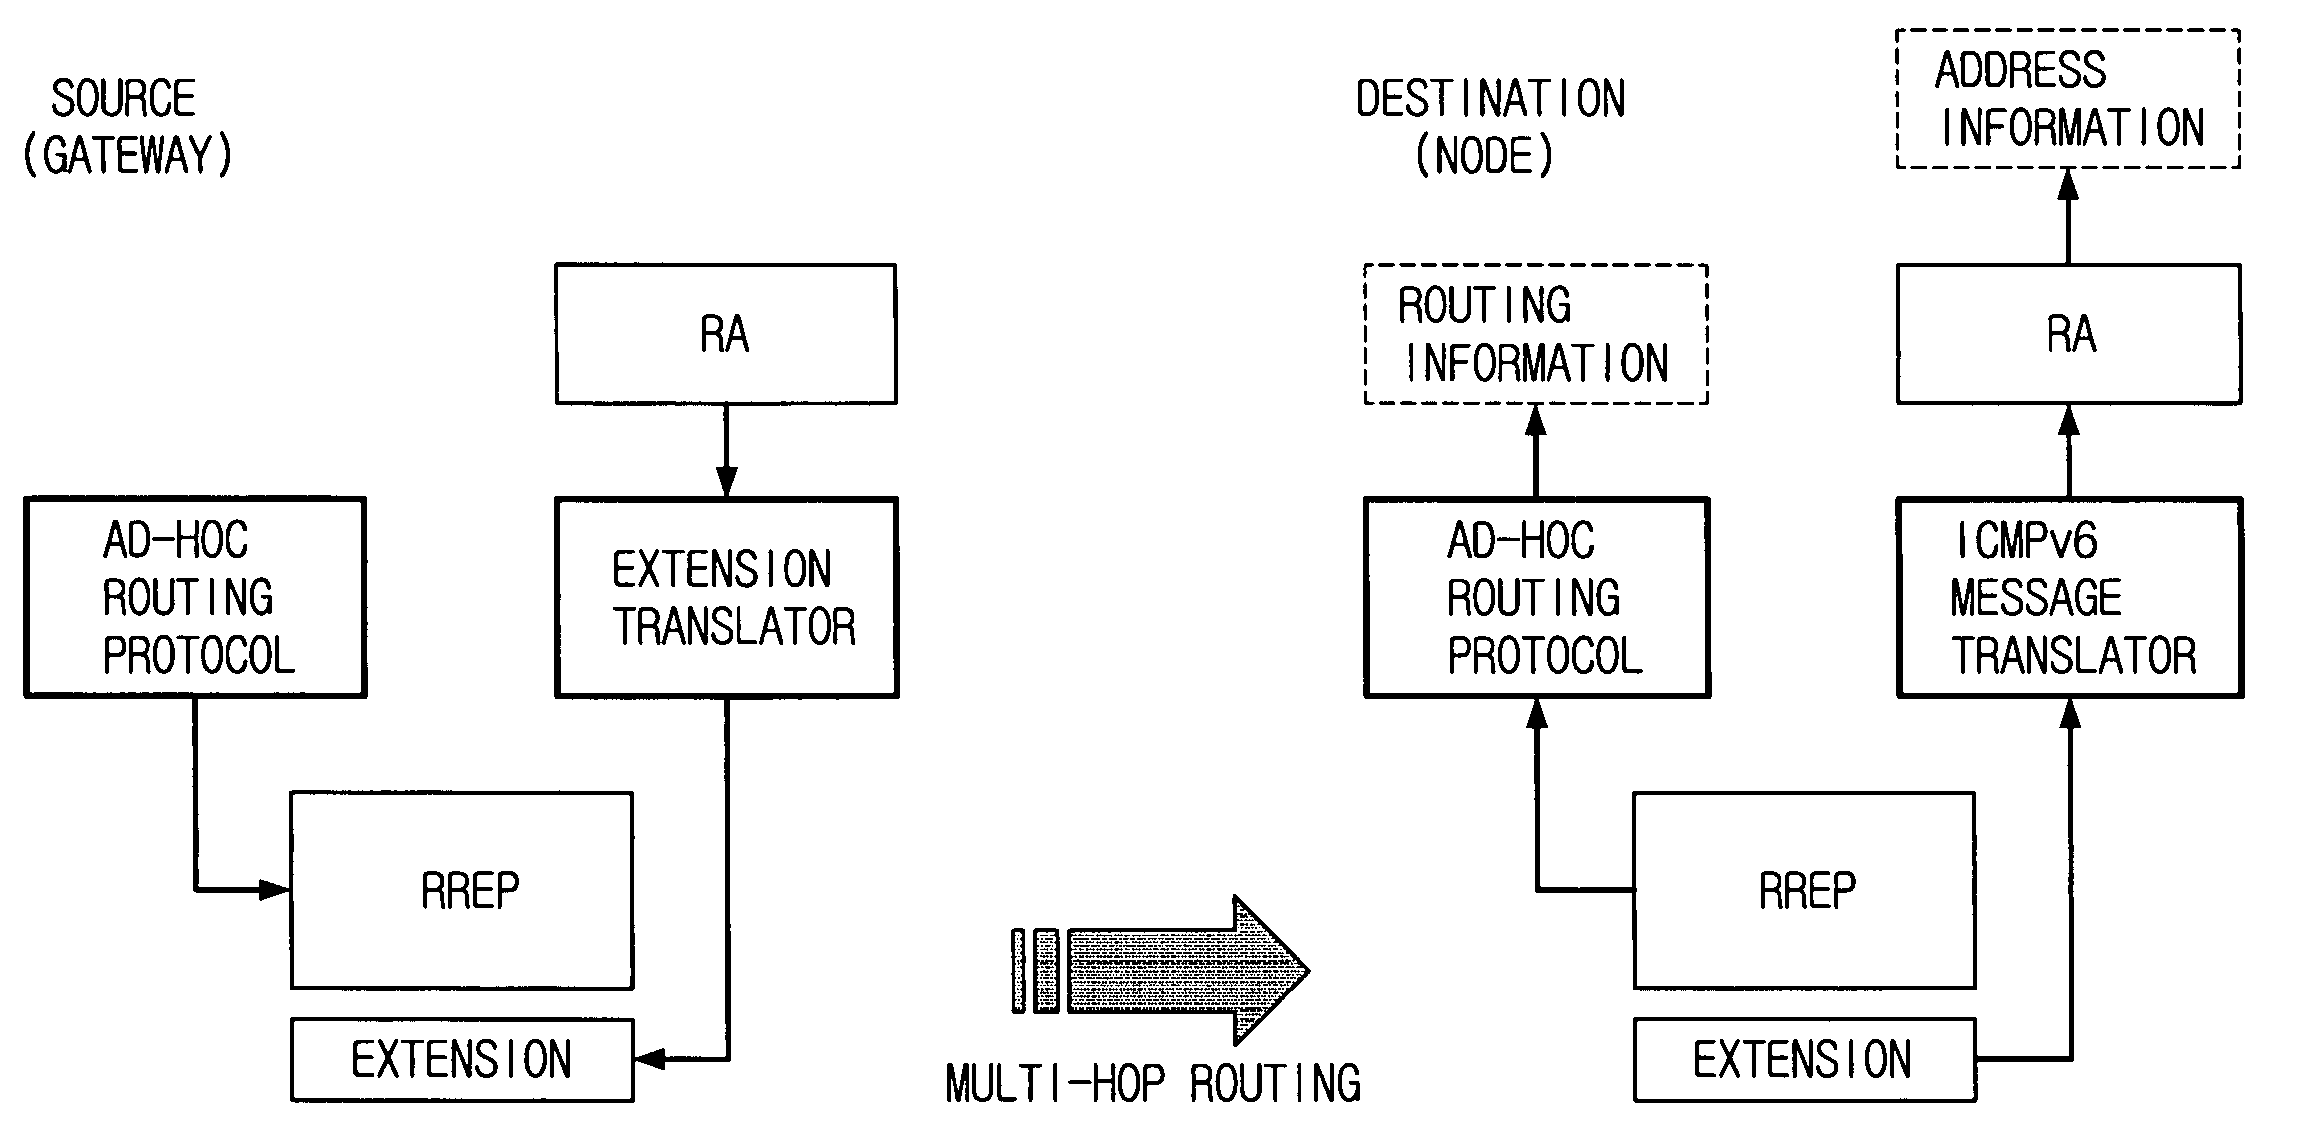 Ad-hoc network for routing extension to support Internet protocol version 6 (IPv6) and method thereof